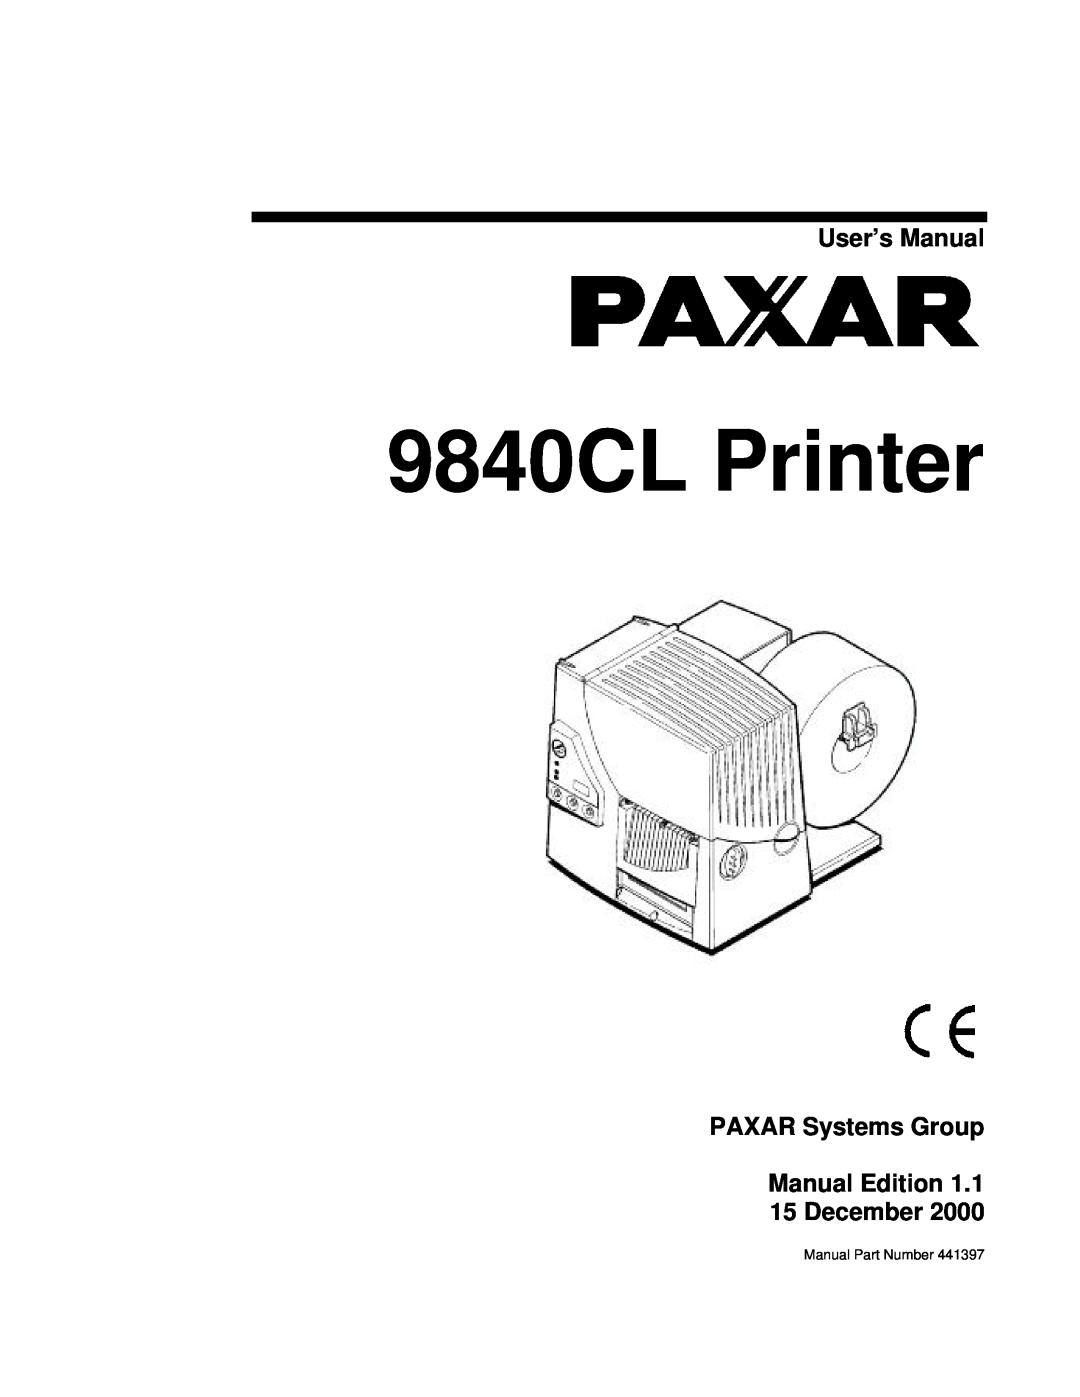 Paxar user manual User’s Manual, PAXAR Systems Group Manual Edition 15 December, 9840CL Printer, Manual Part Number 